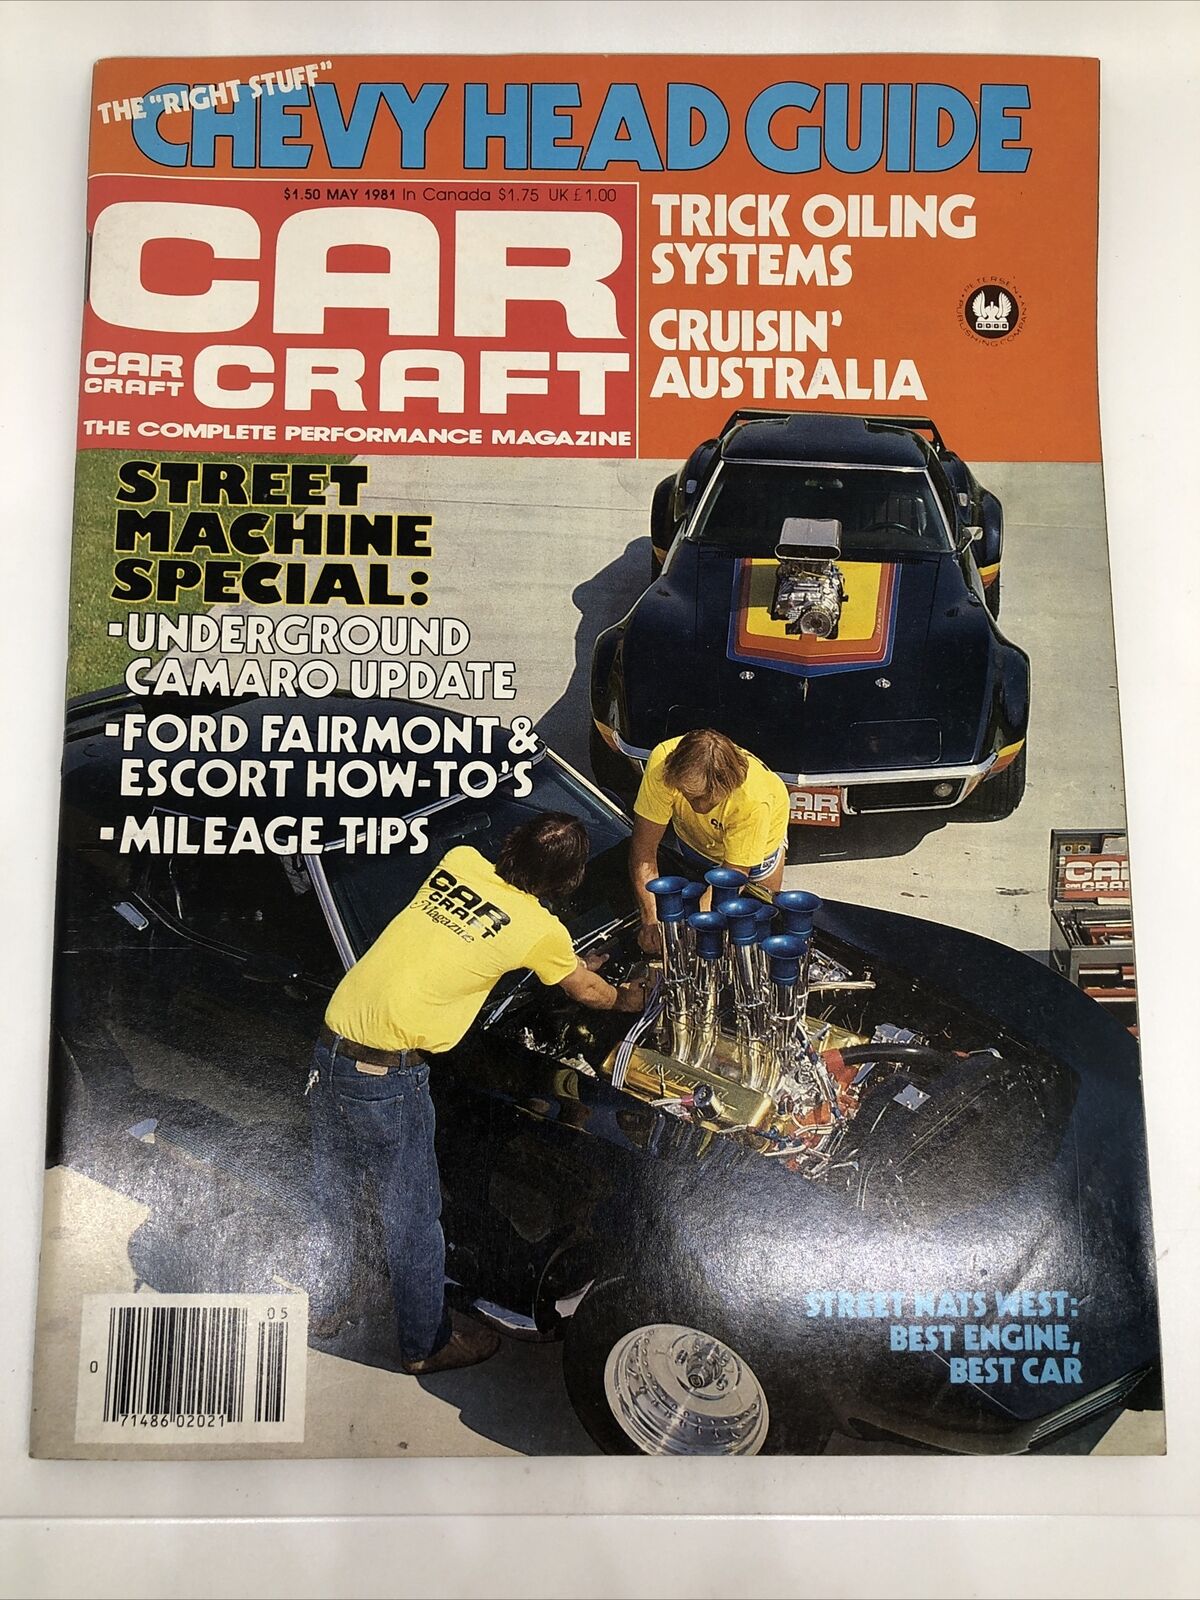 CAR CRAFT Magazine May 1981 - Chevy Head Guide